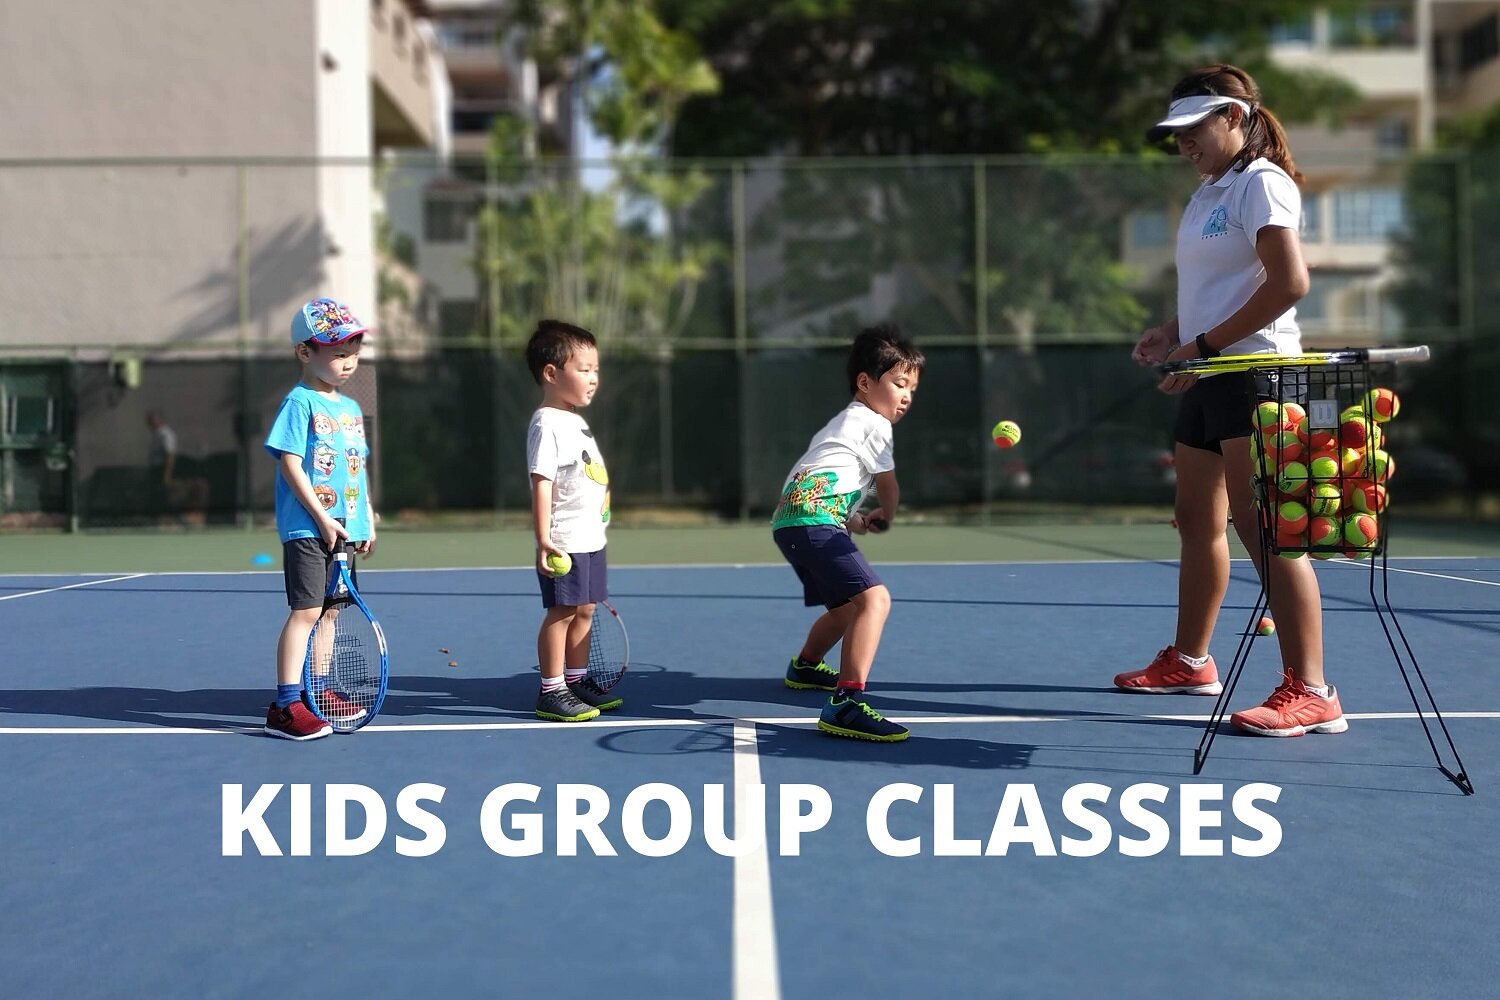 Kids Group Tennis Lessons